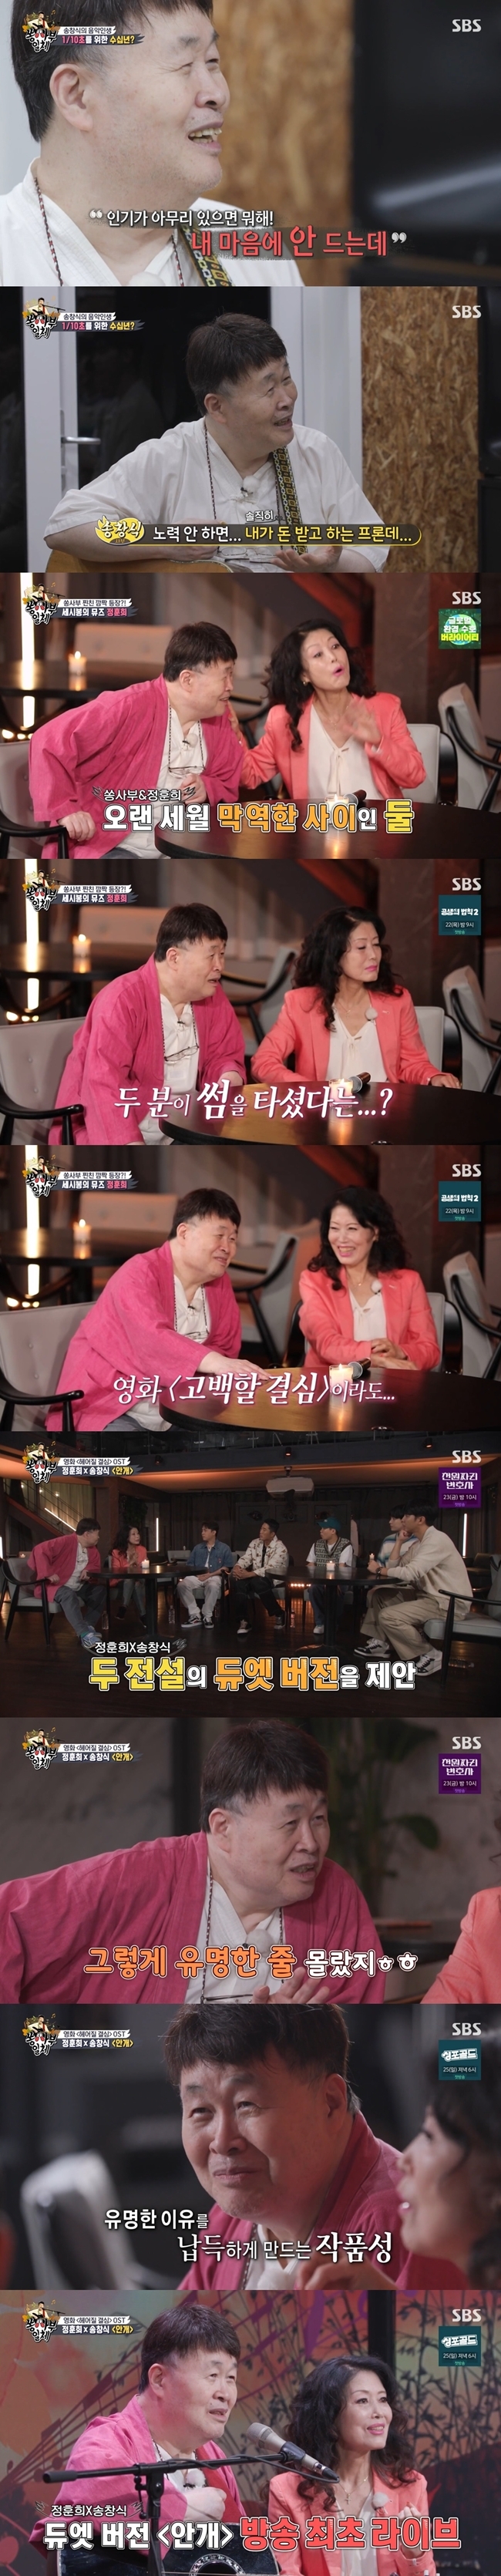 Jung Hoon-hee and Song Chang-sik showed a strong affection.Song Chang-sik appeared as master in SBS All The Butlers broadcast on September 18th.Song Chang-sik said: When I was a junior high school student, I went to the Gyeonggi Province Competition and won second place without first place; no one is better than me, but I have no first place skills.It is not difficult to give first place in the competition because it is not called as formal Vocal music.I still thought I was the best at Gyonggi Province. There are three more men in Seoul, not me, but my song was not a song.I was not good at it, I was not a problem, and my friends were systematically taught, but I was not a voice of Vocal music.I didnt learn (Vocal music) but I just did well and I liked the voice, he recalled.Song Chang-sik said, I am a specialist, but if I do not fit, it tastes like death. I do not like it anyhow if it is popular.If you dont, what singer is it? said Lee Seung-gi, who humbly, Ive actually missed a few times (in my ability).I am very reflective, he said.In addition, Jung Hoon-hee was a special guest.Yang Se-hyeong wondered, There was a rumor that there was a sense of men and women that two of you were riding a thumb in the days of Cecibong because the style of clothes was right.Jung Hoon-hee said, I have never said that Chang-sik does not do his brother and Duets, and Chang-sik did his brother, Song Chang-sik said honestly, Is not that a thumb?Jung Hoon-hee was embarrassed and said, I waited for you to express that you like me.Lee Seung-gi said, I have to tell Park Chan-wook that I have to make a decision to make Confessions.The Fog, sung by Jung Hoon-hee and Song Chang-sik, was inserted into the movie Resolution to Break Up OST. Its my debut song in 1967.After 56 years, Park Chan-wook contacted me and asked me to do Song Chang-sik and Duets.So I said, Lets do The Fog, she told the behind-the-scenes.But Song Chang-sik didnt know who director Park Chan-wook was; Song Chang-sik said: I didnt know it was such a famous manager.I thought he was a director, but I did not know he was so influential. I saw a movie and there was a famous reason.I love it when the voice is out of order. The movie itself is different for men and women. The love that we think of each other is different, said Jung Hoon-hee.The first stage of the show, Song Chang-sik and Jung Hoon-hees The Fog Duets, was also released; the disciples and Song Chang-siks stage of the Yuho River also followed.Lee Seung-gi said, This is the last season of All The Butlers season that I have done for five years today.Just as we said that we lacked songs, we always do do best, but we feel lacking.I hope that I will return to Season 2 more beautifully by filling the shortage. We made a stage with the members and said We are sorry. 